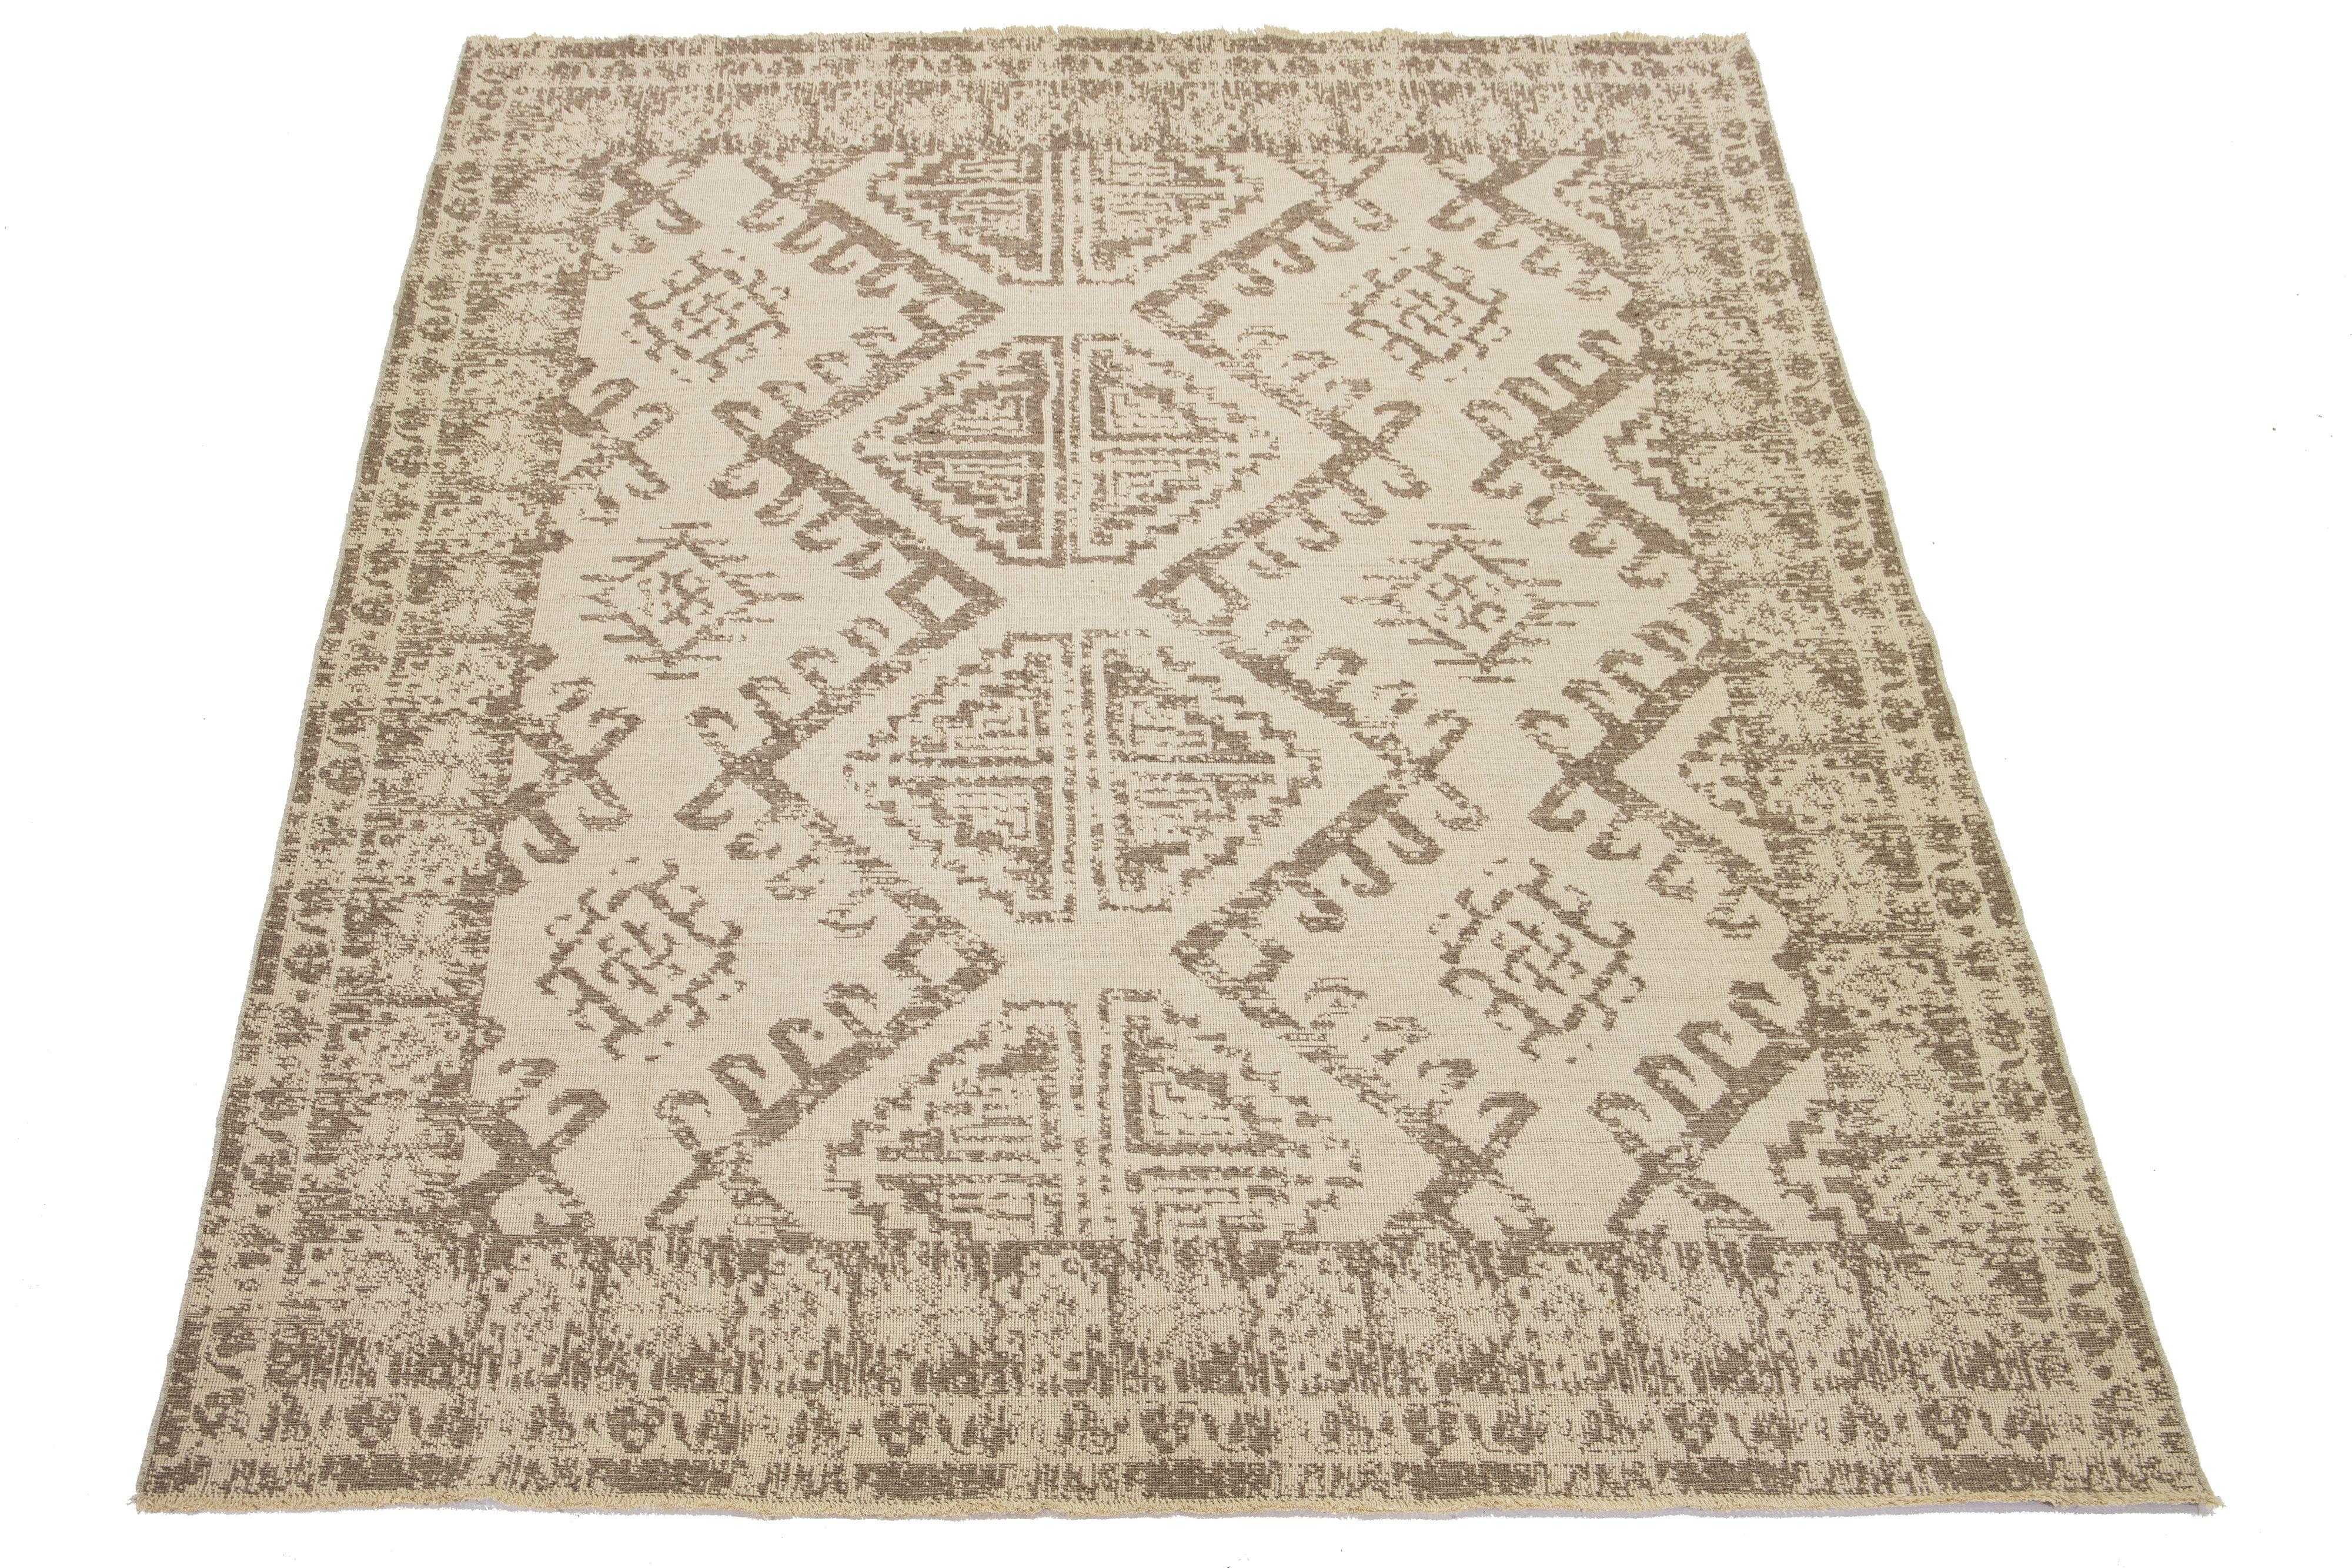 This hand-loomed wool rug features a beautiful beige background with a tribal pattern in brown that covers the entire rug. 

This rug measures 9'8